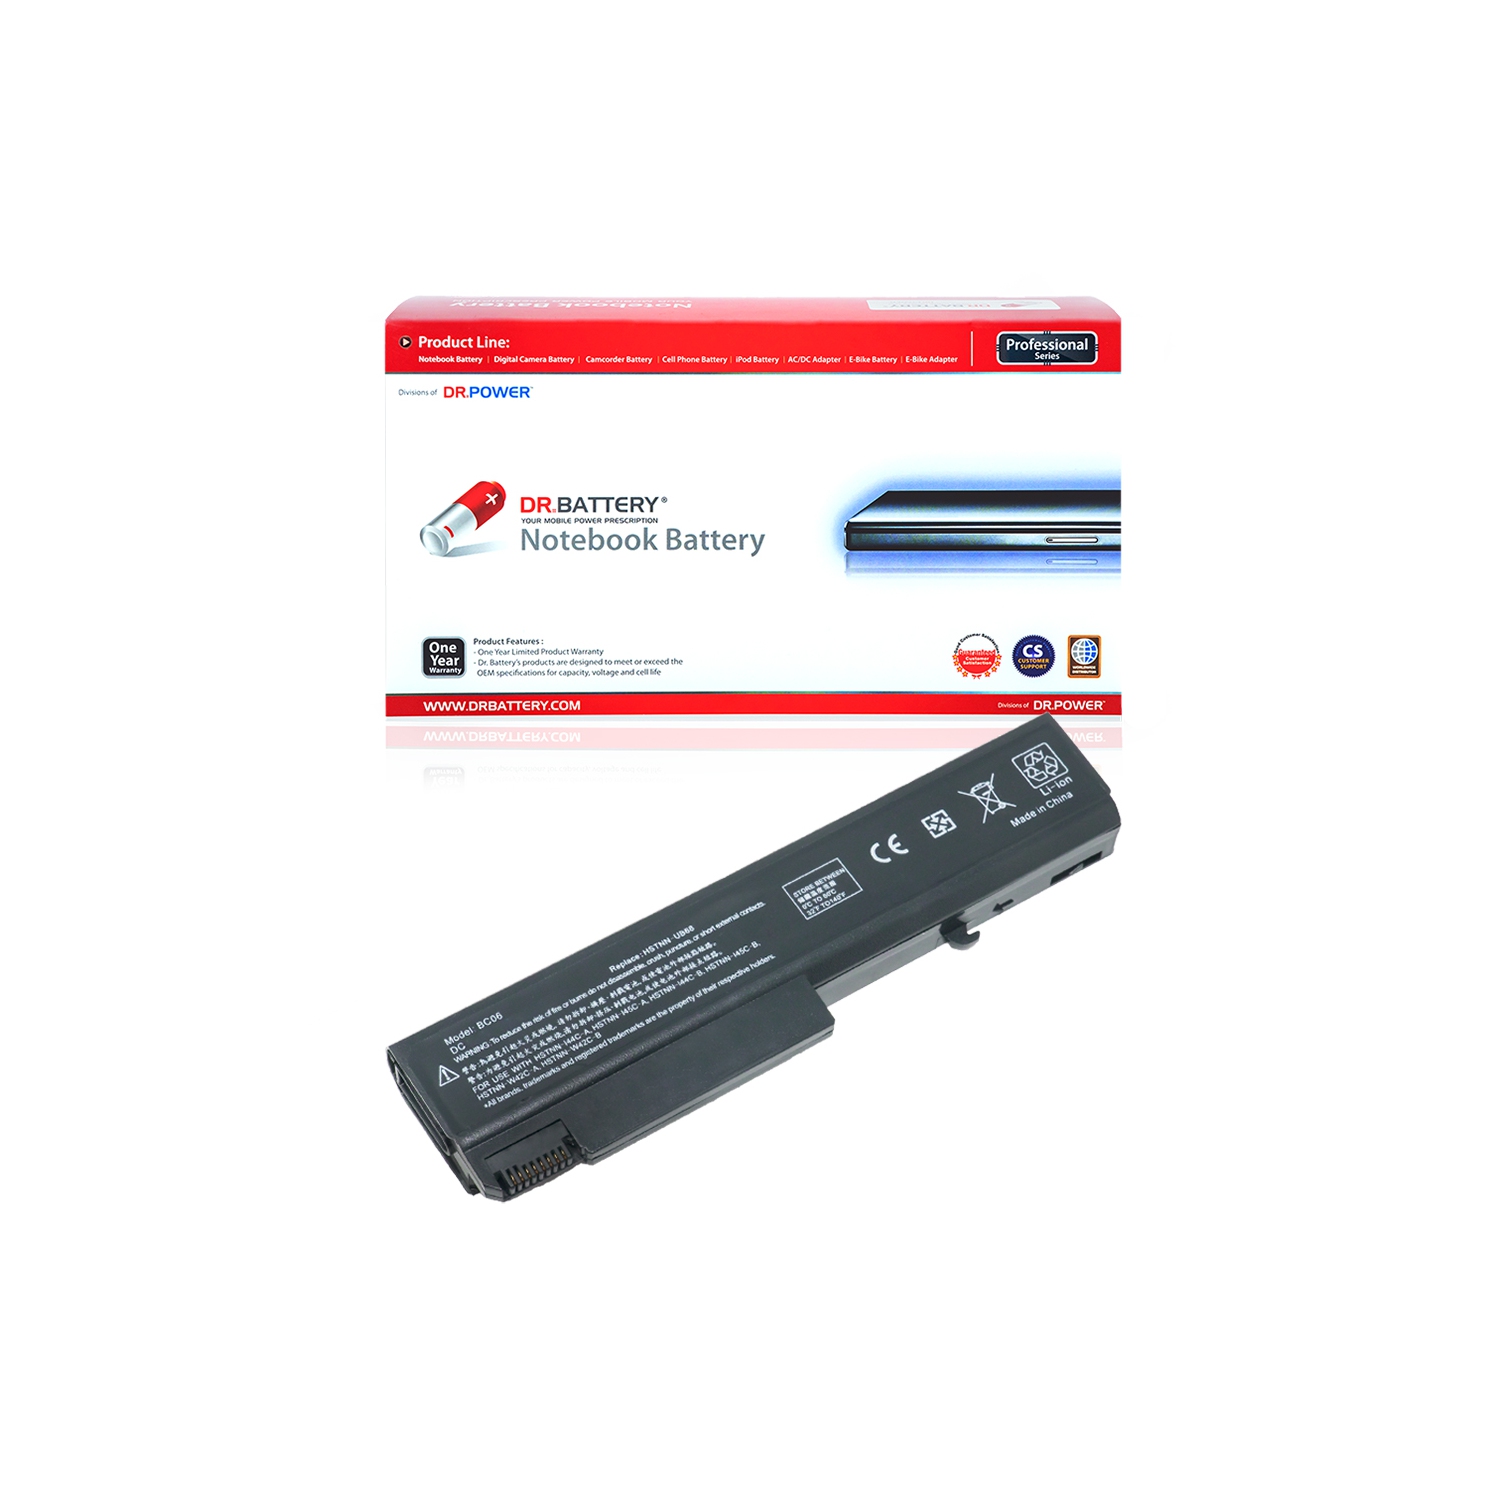 DR. BATTERY - Replacement Laptop Battery for HP EliteBook 6930p / 8440p / 8440w Mobile / TD06047 / TD06051 / TD06051XL / TD06051XL CL [10.8V / 48Wh] ***Free Shipping***